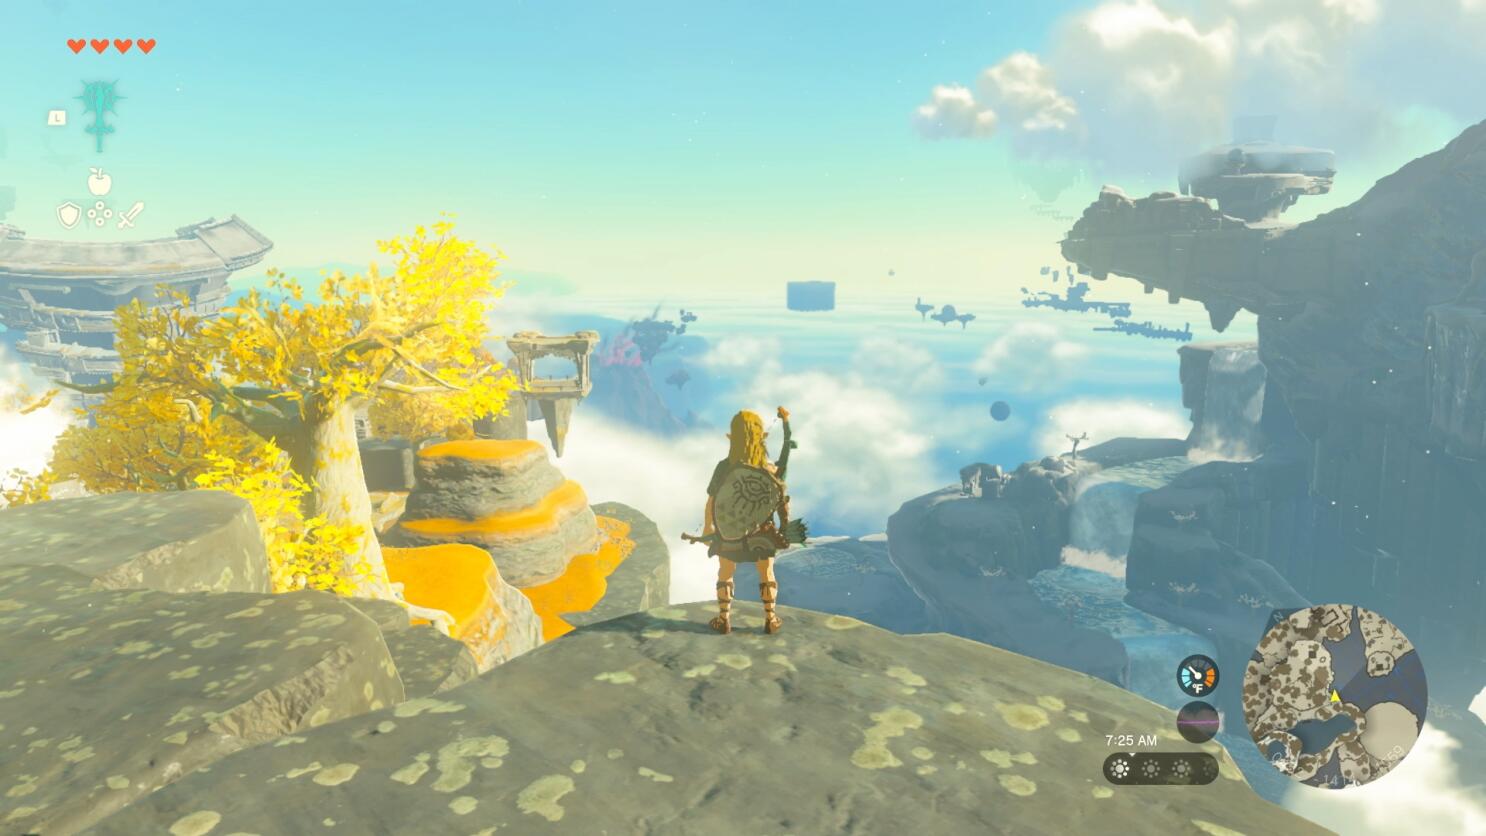 Here's a closer look at The Legend of Zelda: Breath of the Wild's